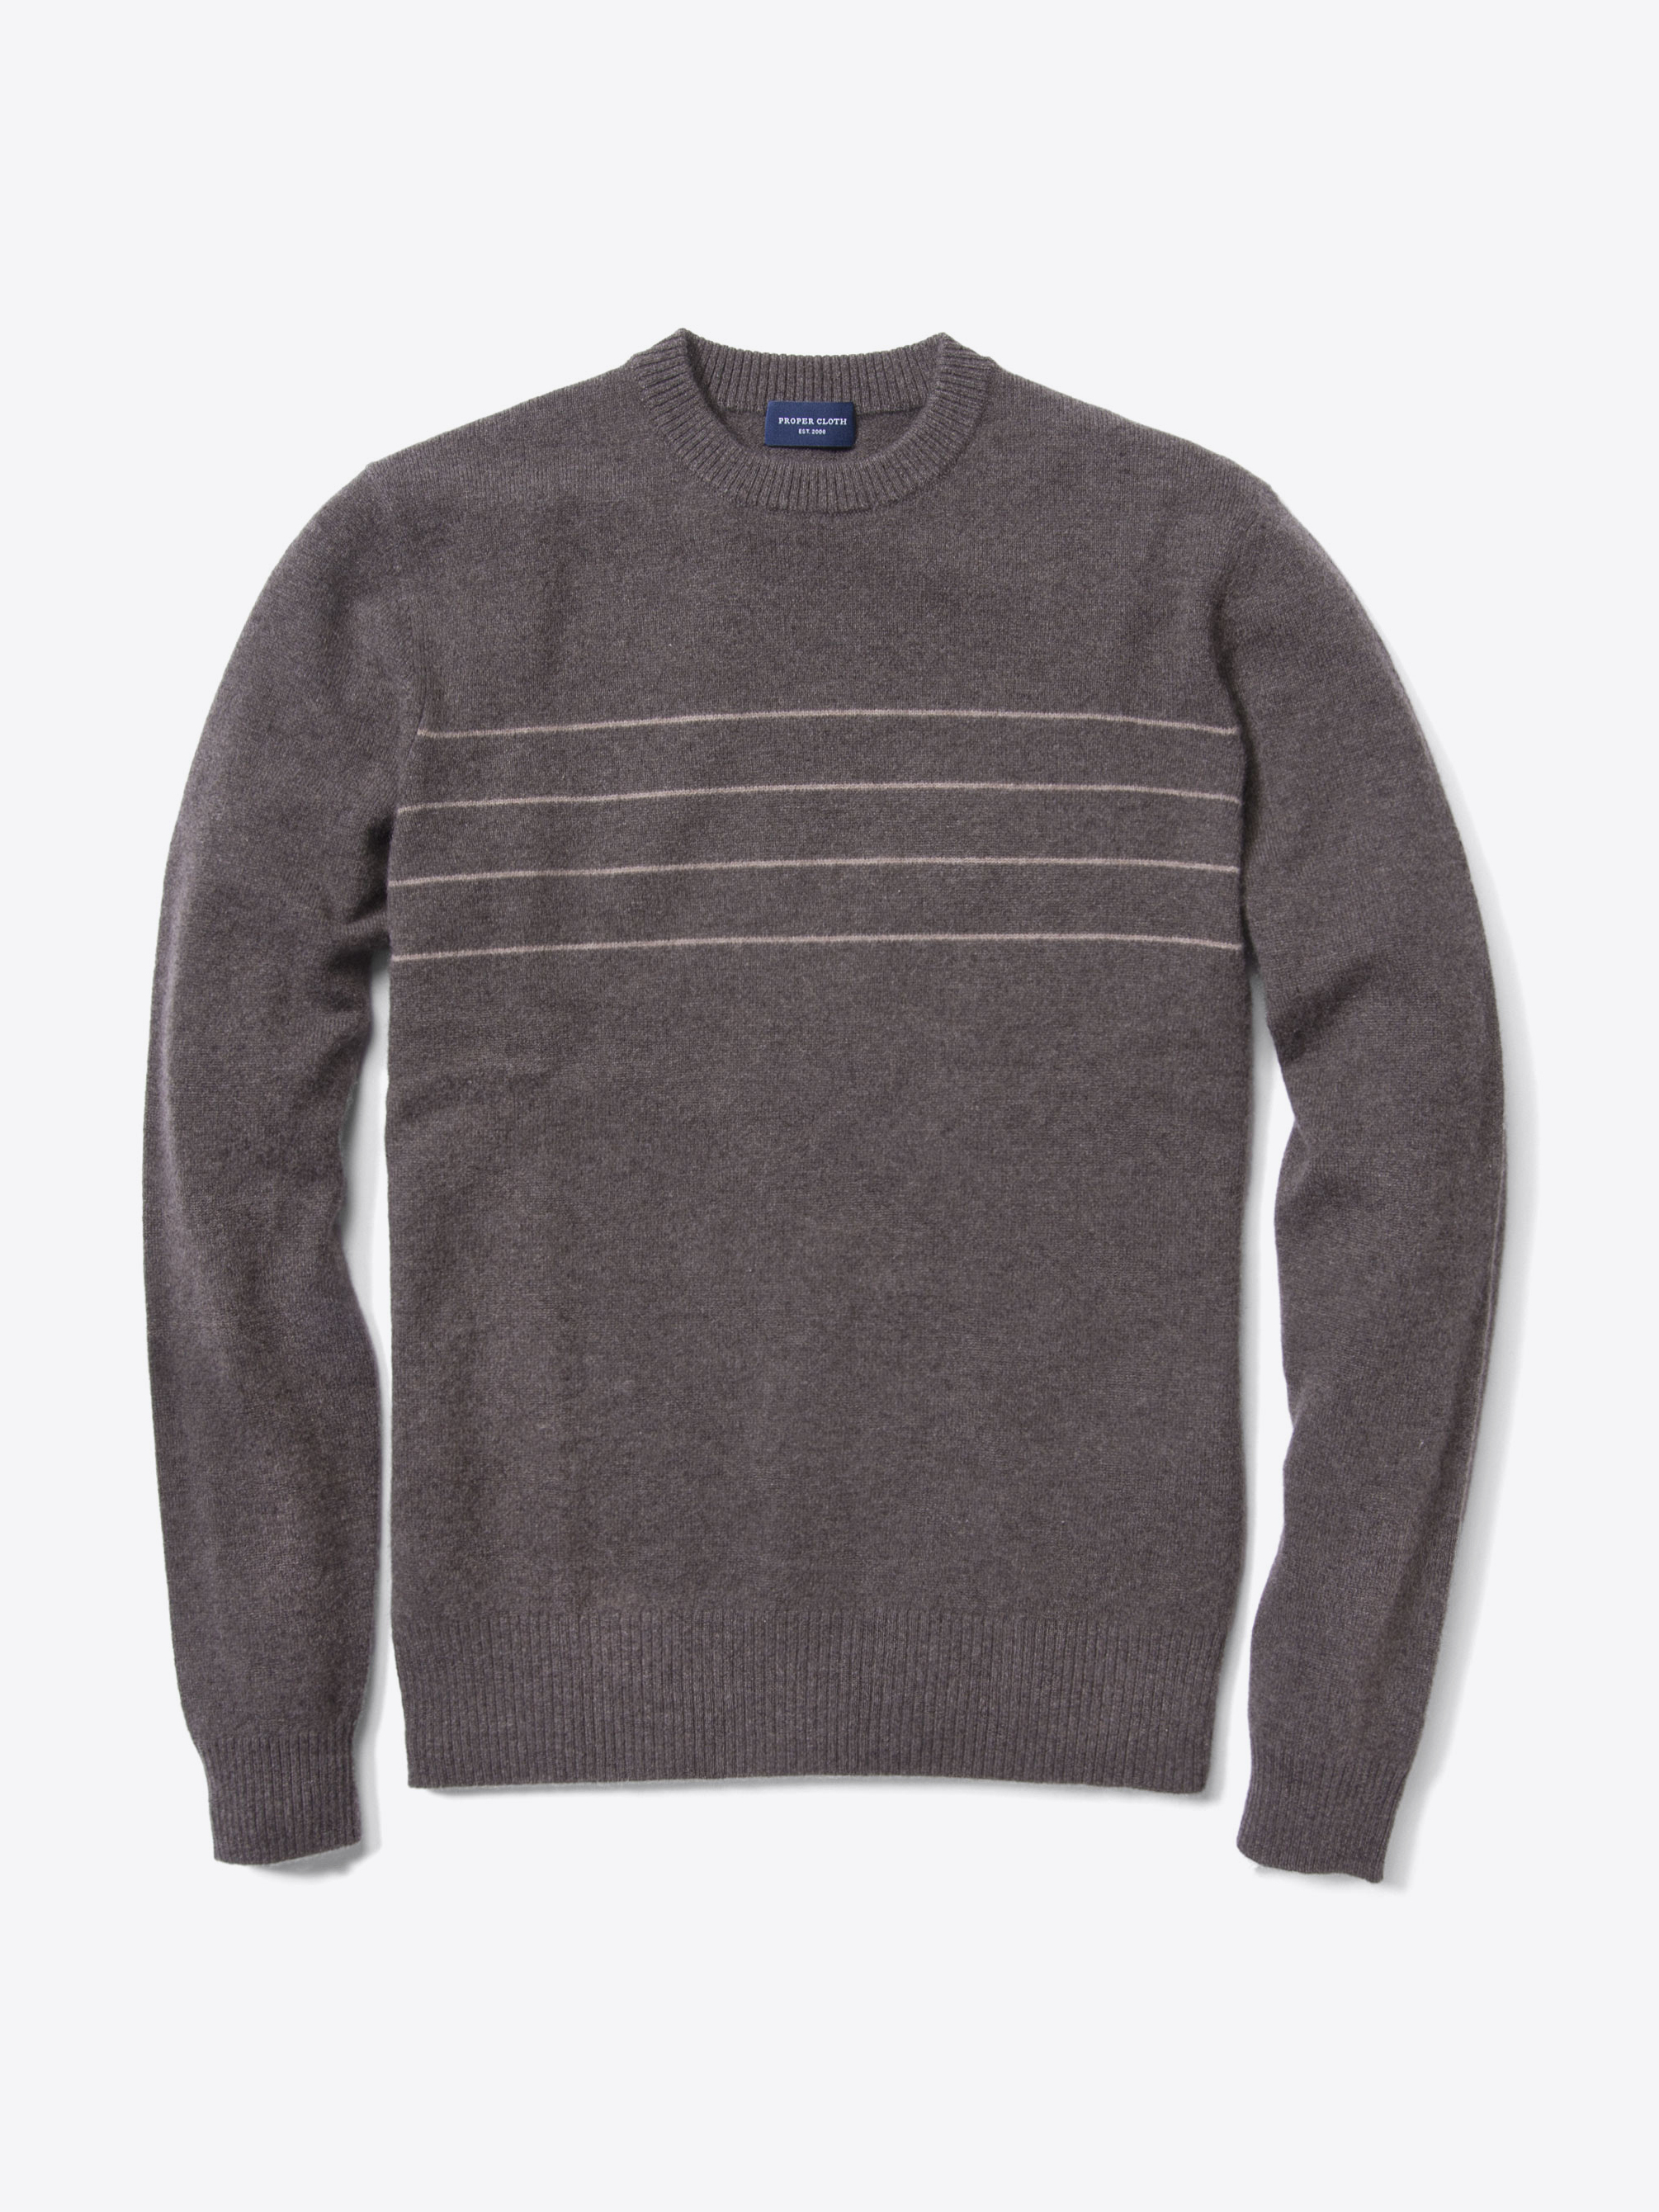 Zoom Image of Brown and Tan Stripe Cashmere Sweater